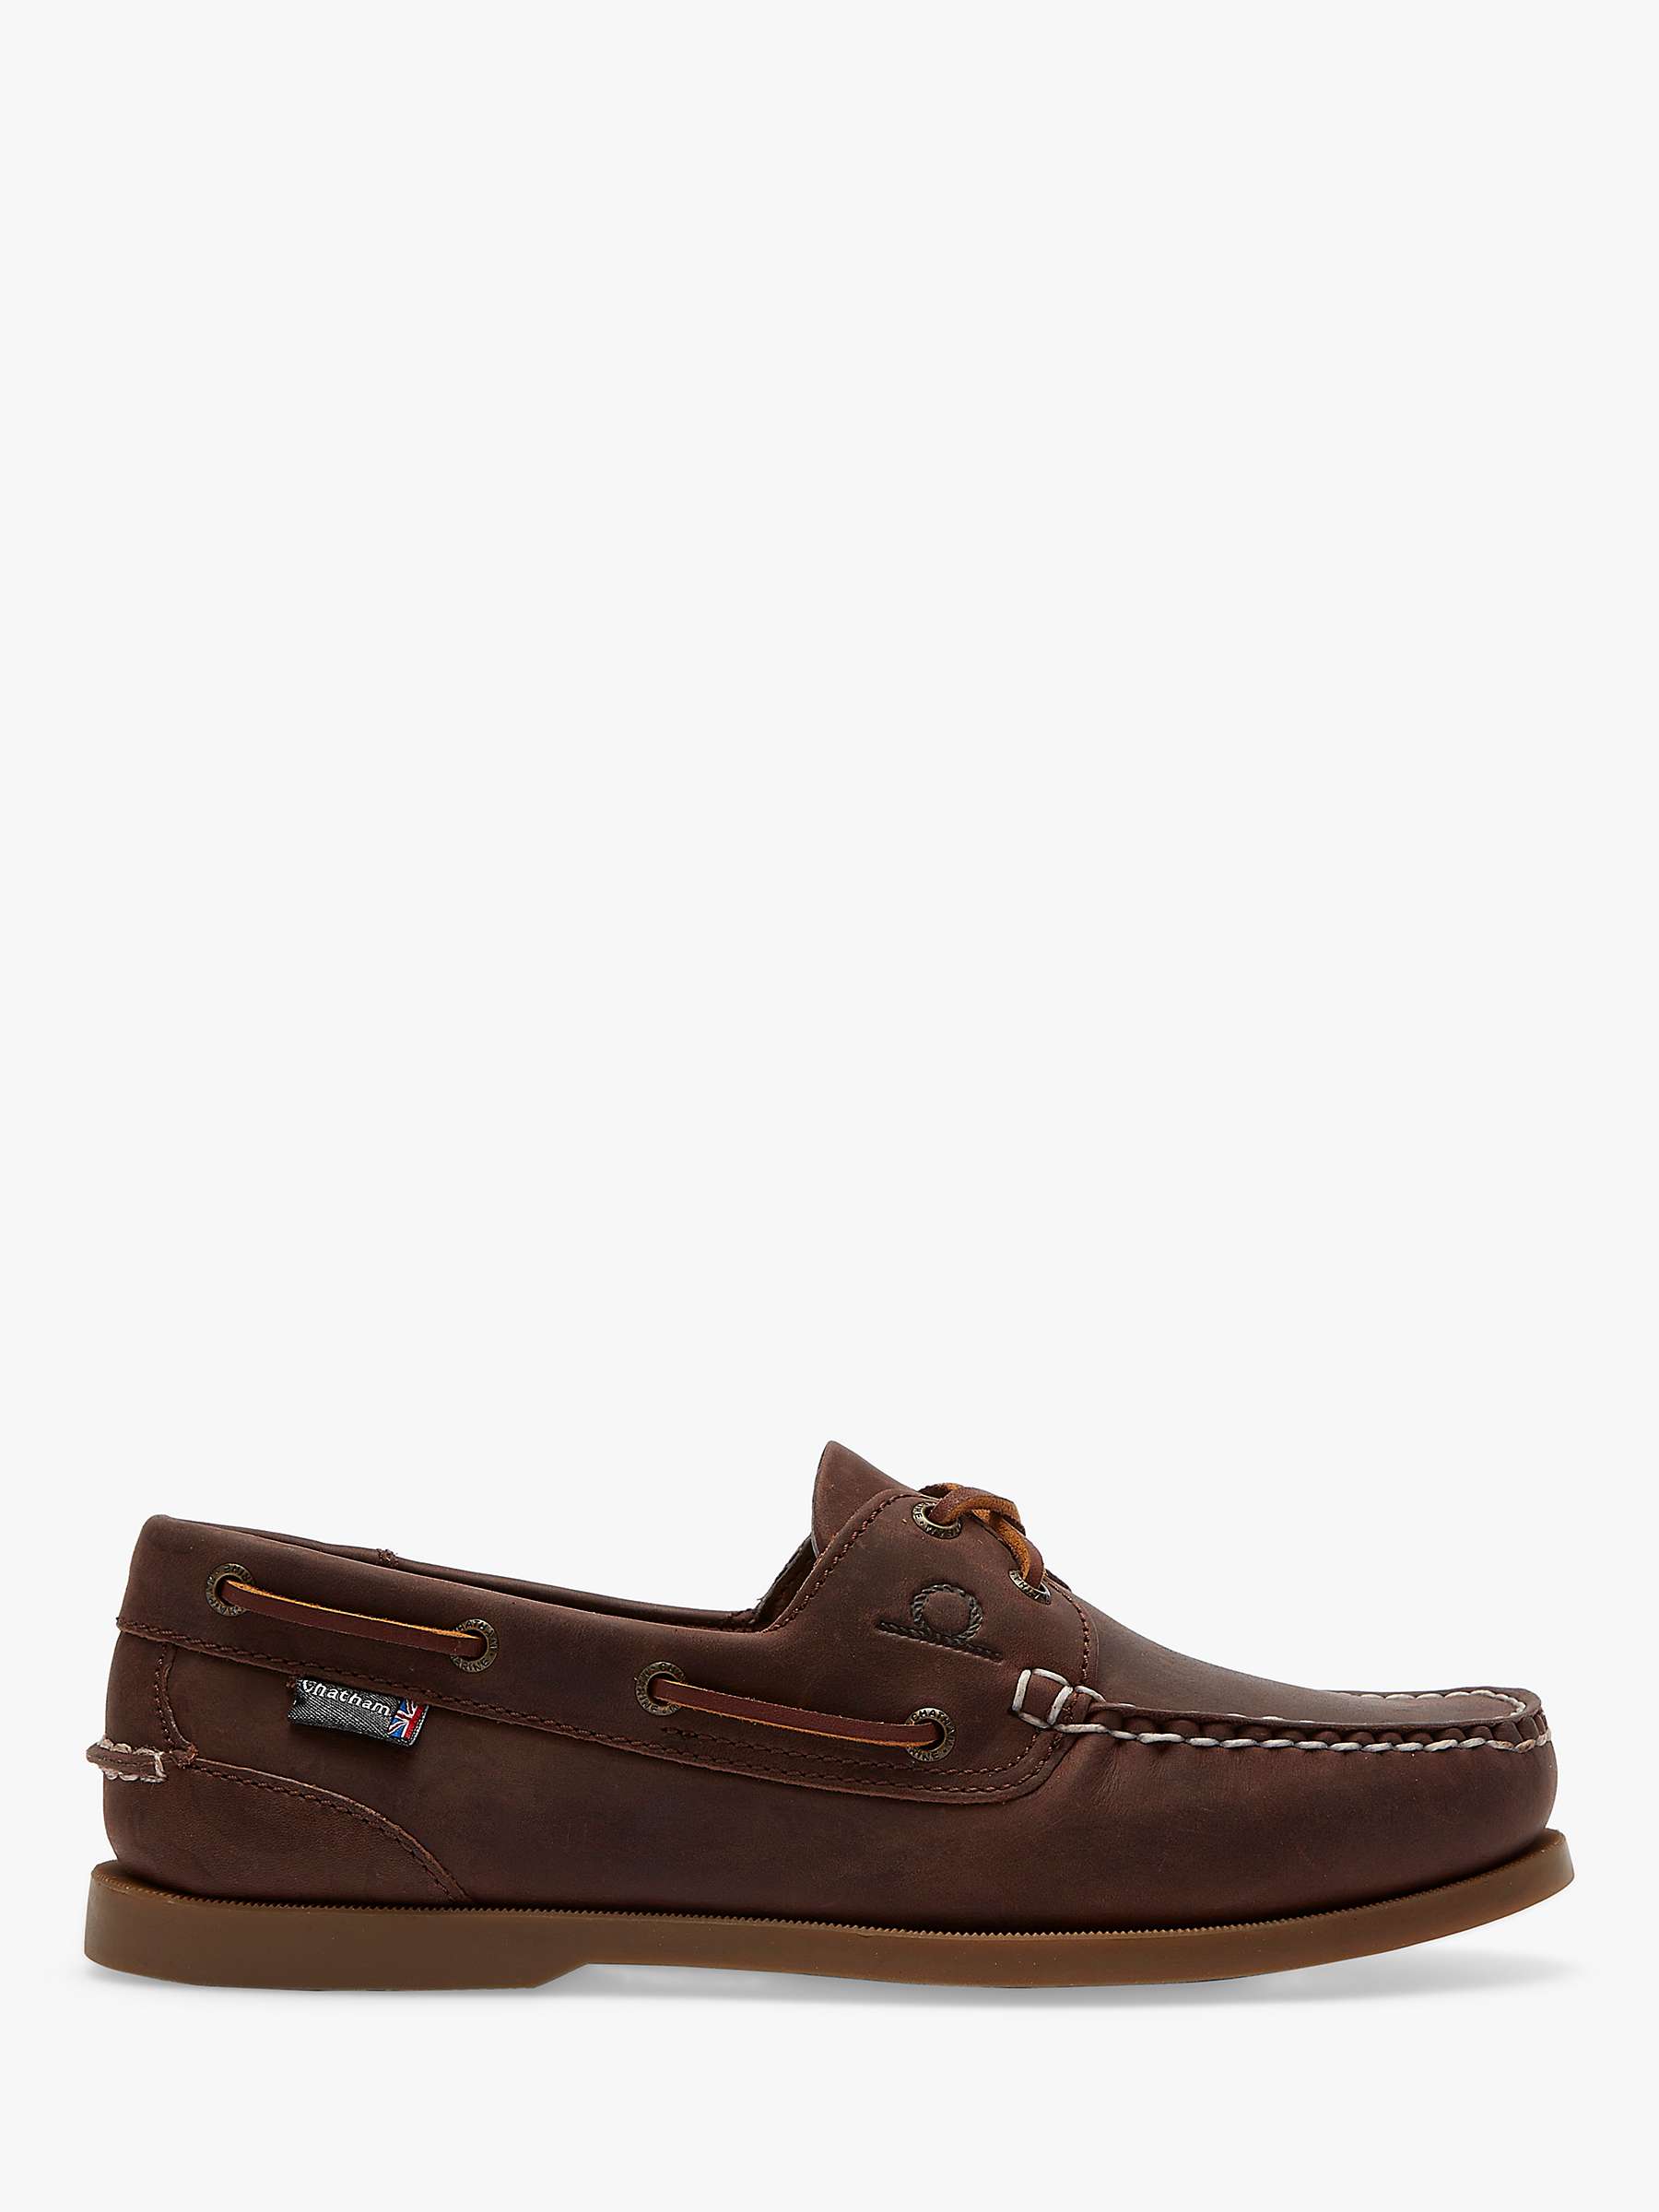 Buy Chatham Deck II G2 Leather Boat Shoes, Chocolate Online at johnlewis.com